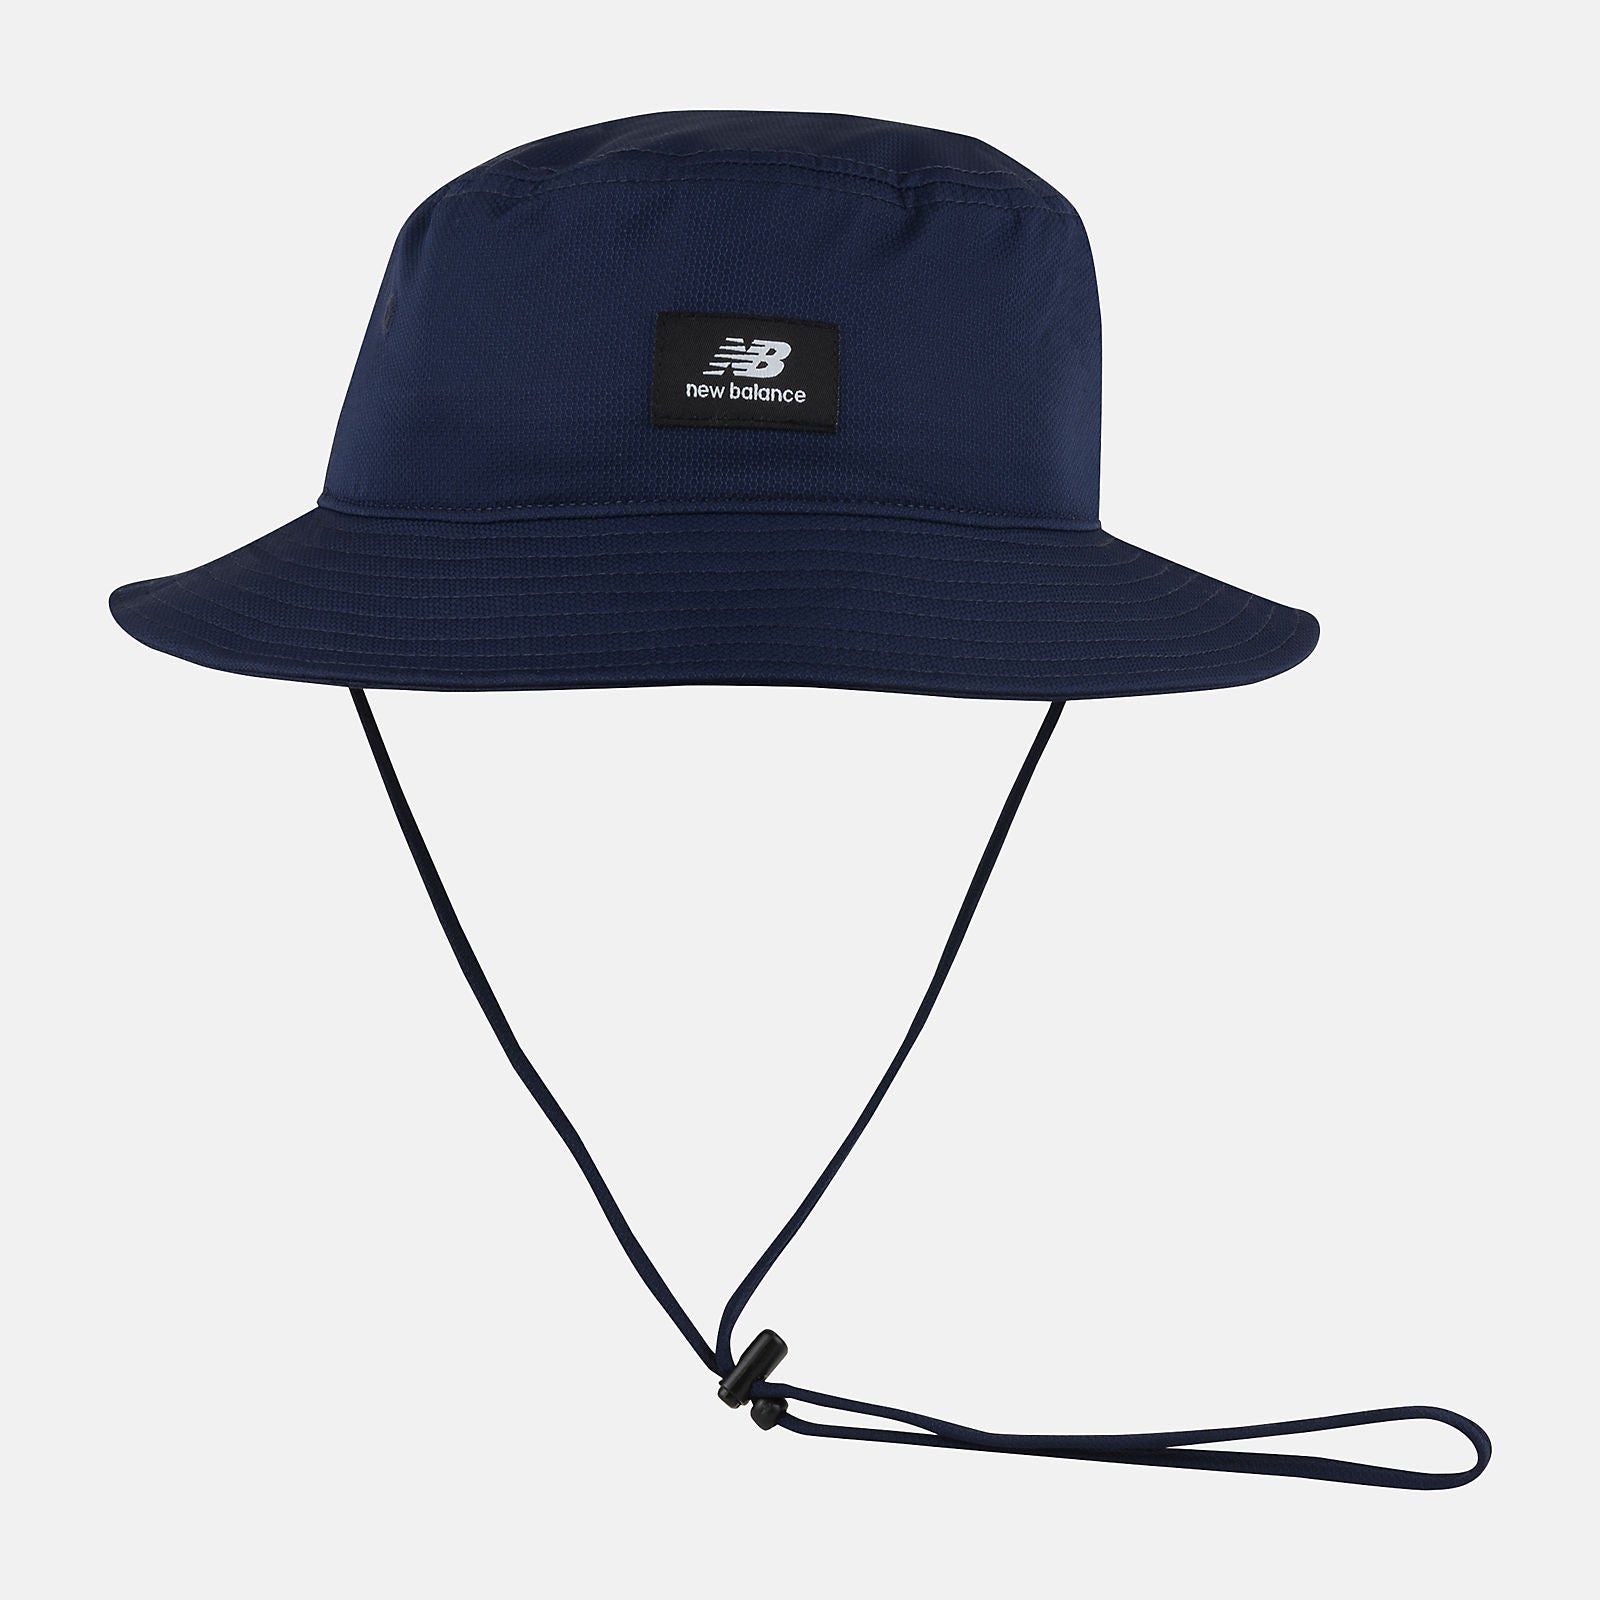 NEW BALANCE Kid's Bucket Hat in Navy LAH31007 O/S NB NAVY HAZE FROM EIGHTYWINGOLD - OFFICIAL BRAND PARTNER